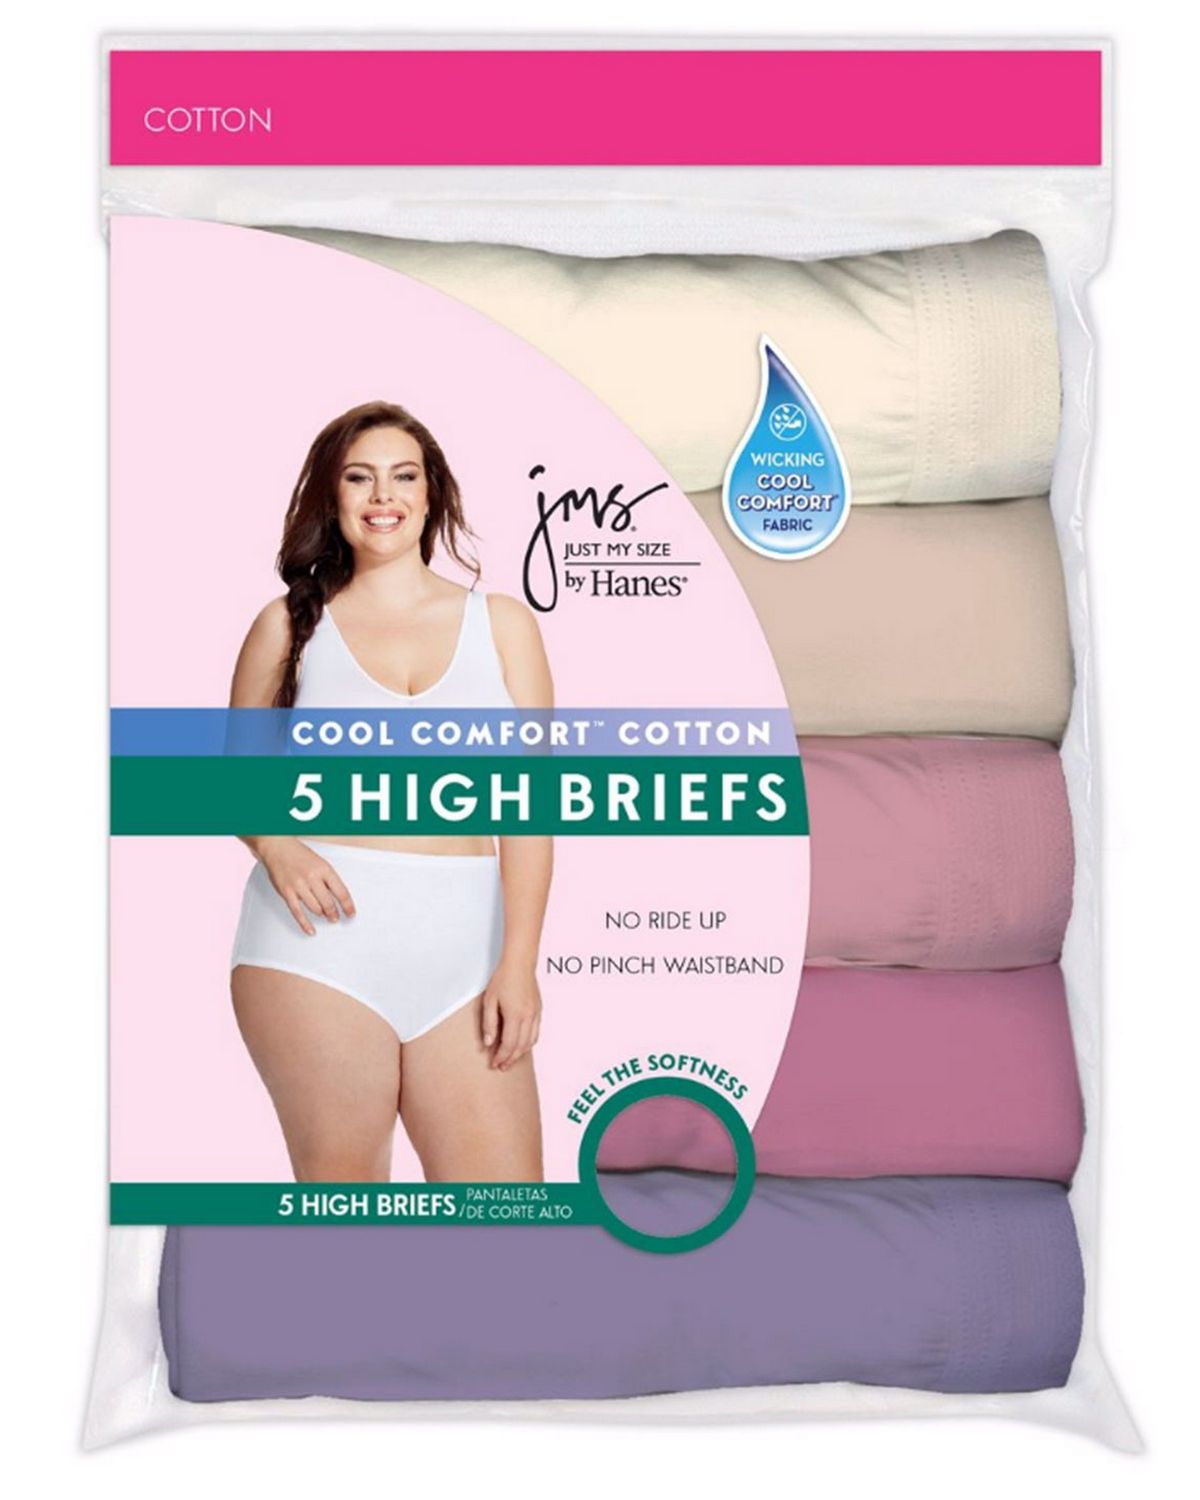 Women's underwear: Hanes Just My Size bikinis or briefs, in various colors  5 pk